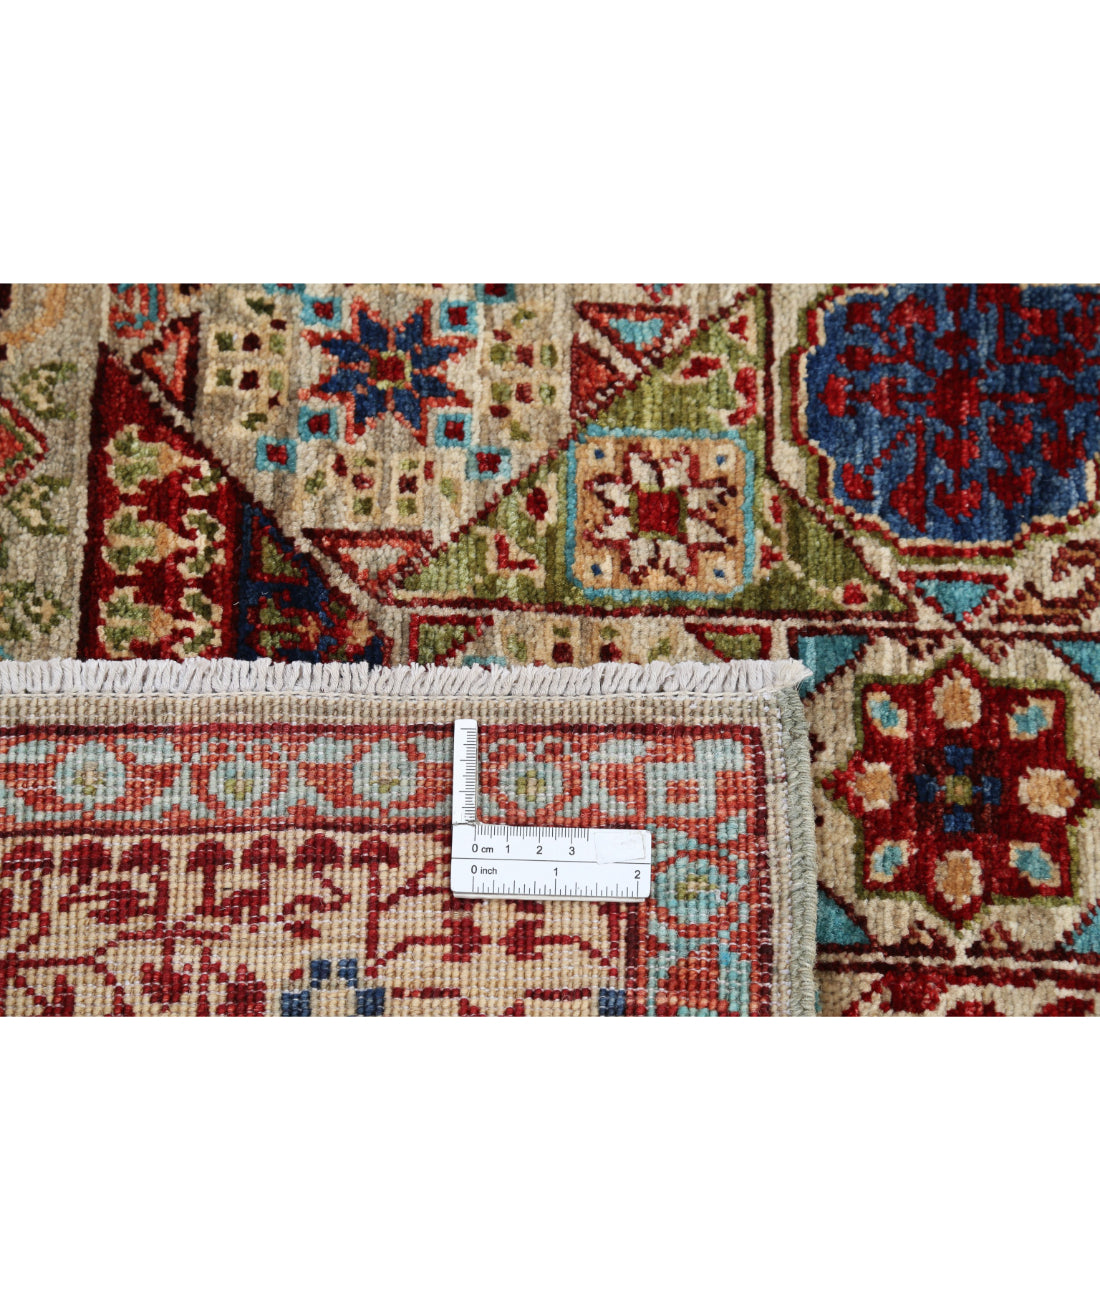 Hand Knotted Mamluk Wool Rug - 8'1'' x 10'0'' 8'1'' x 10'0'' (243 X 300) / Beige / Red